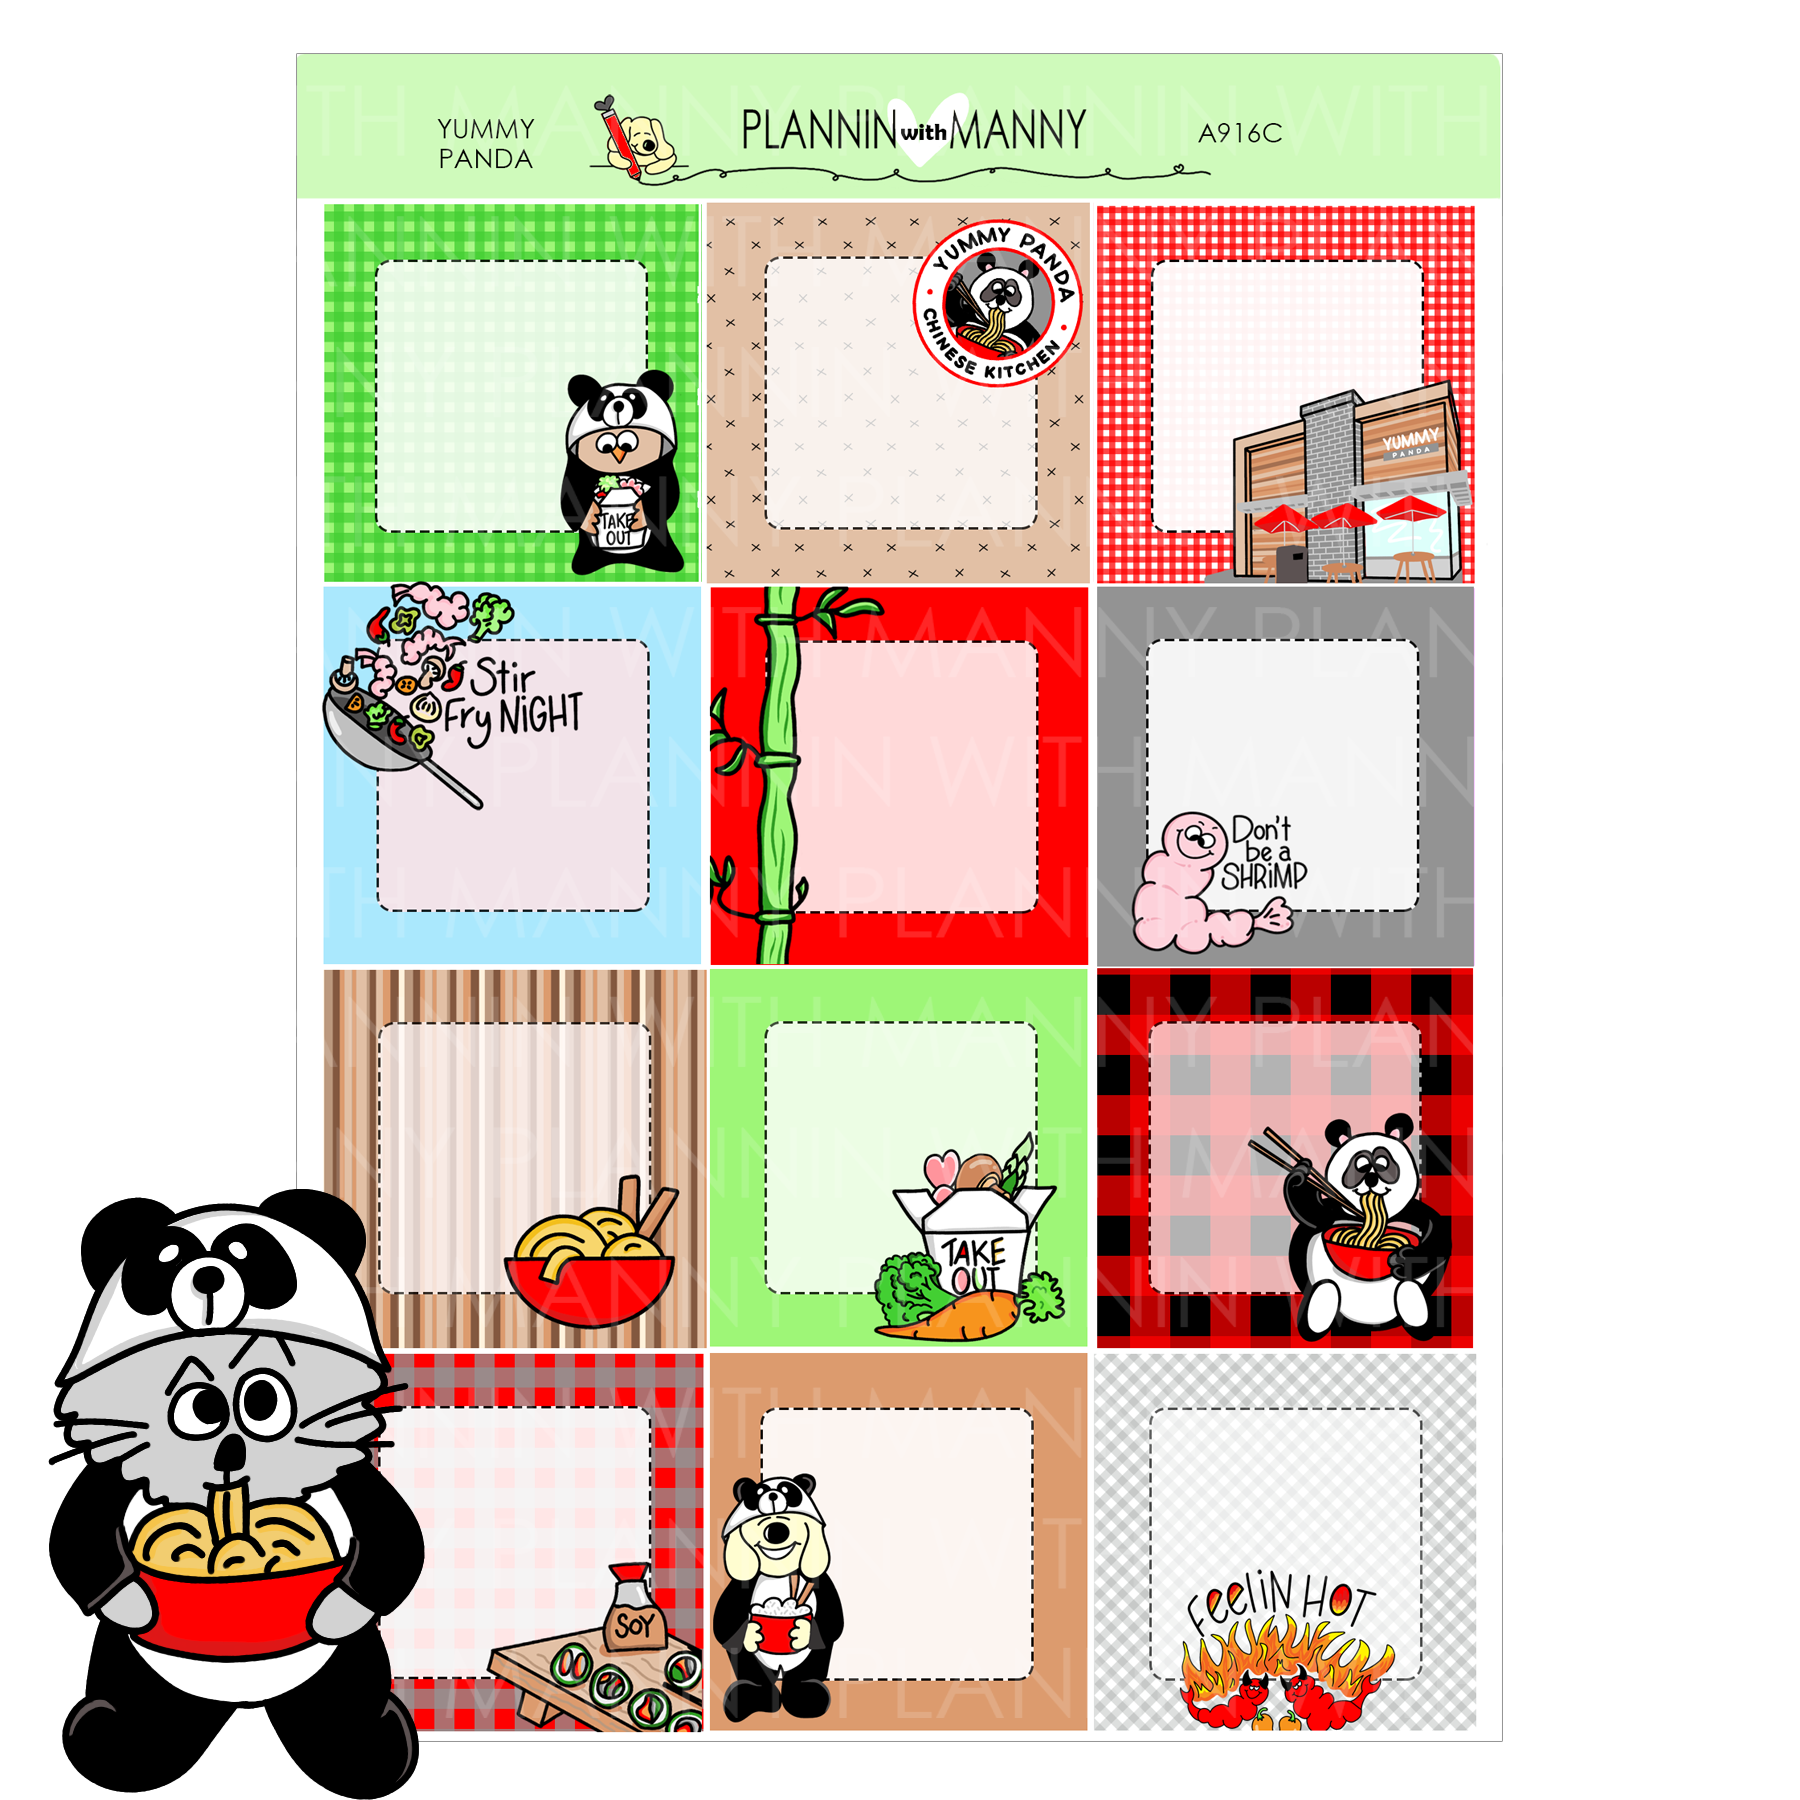 A916C Yummy Panda 1.5" Square Planner Stickers